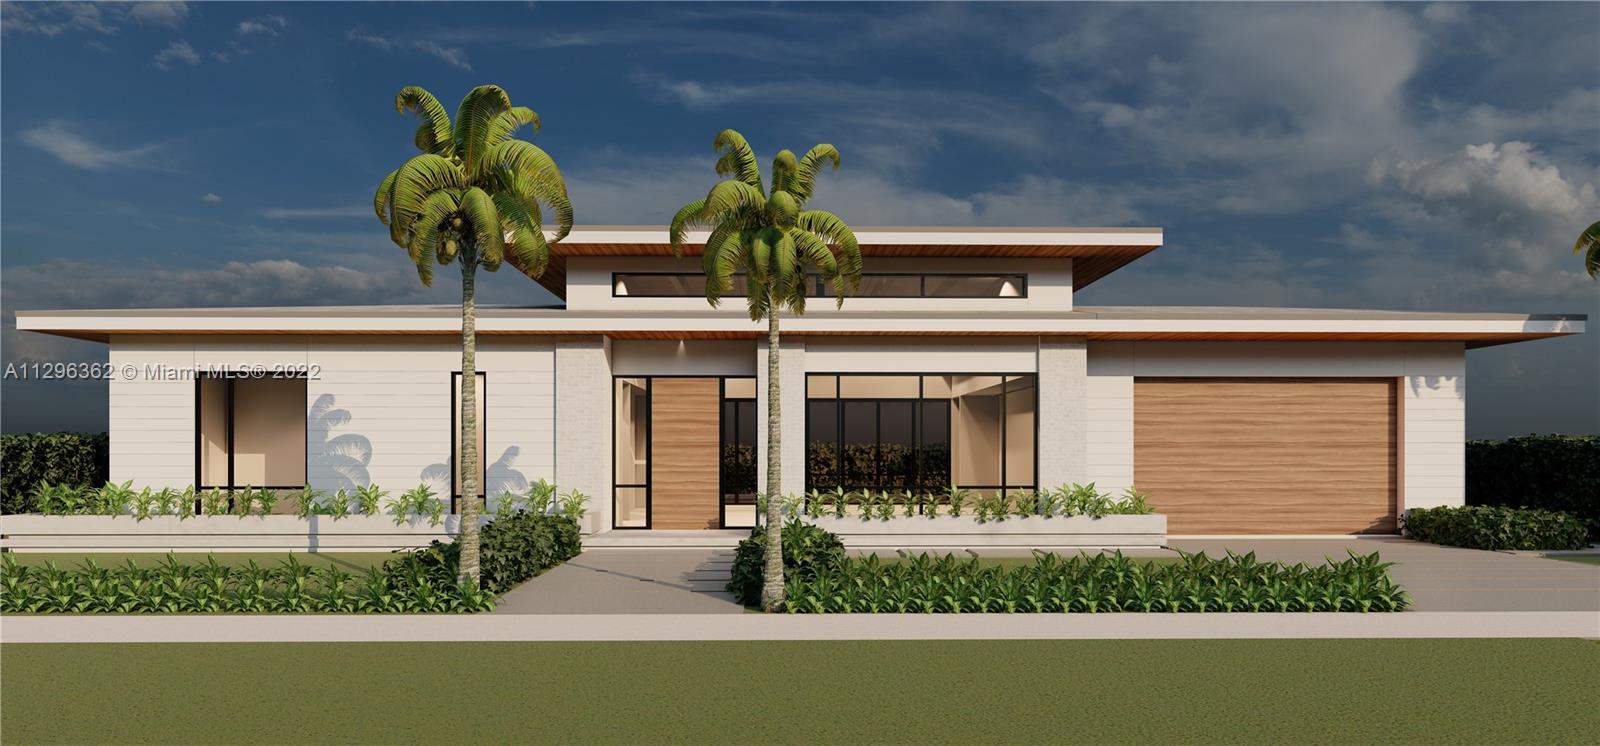 Opportunity to remodel or build your dream home on this oversized 9,630 SF square foot lot in a fabulous family friendly neighborhood, only minutes from beautiful parks, shopping, dining and great schools in prestigious Coral Gables! The seller has plans and renderings for remodeling of the existing structure and a demolition permit that is ready to submit for final approval with the City of Coral Gables. Lot clearance has begun and interior demolition of kitchen and bathroom remodels. New impact windows were ordered and paid by seller and ready to be delivered and installed for remodel. Survey attached in document section. Complete the renovation of the existing structure or build a brand new house. BUY - BUILD - HOLD & MANAGE AS RENTAL OR RESELL. Either way it is a great​​‌​​​​‌​​‌‌​‌‌‌​​‌‌​‌‌‌​​‌‌​‌‌‌ investment!